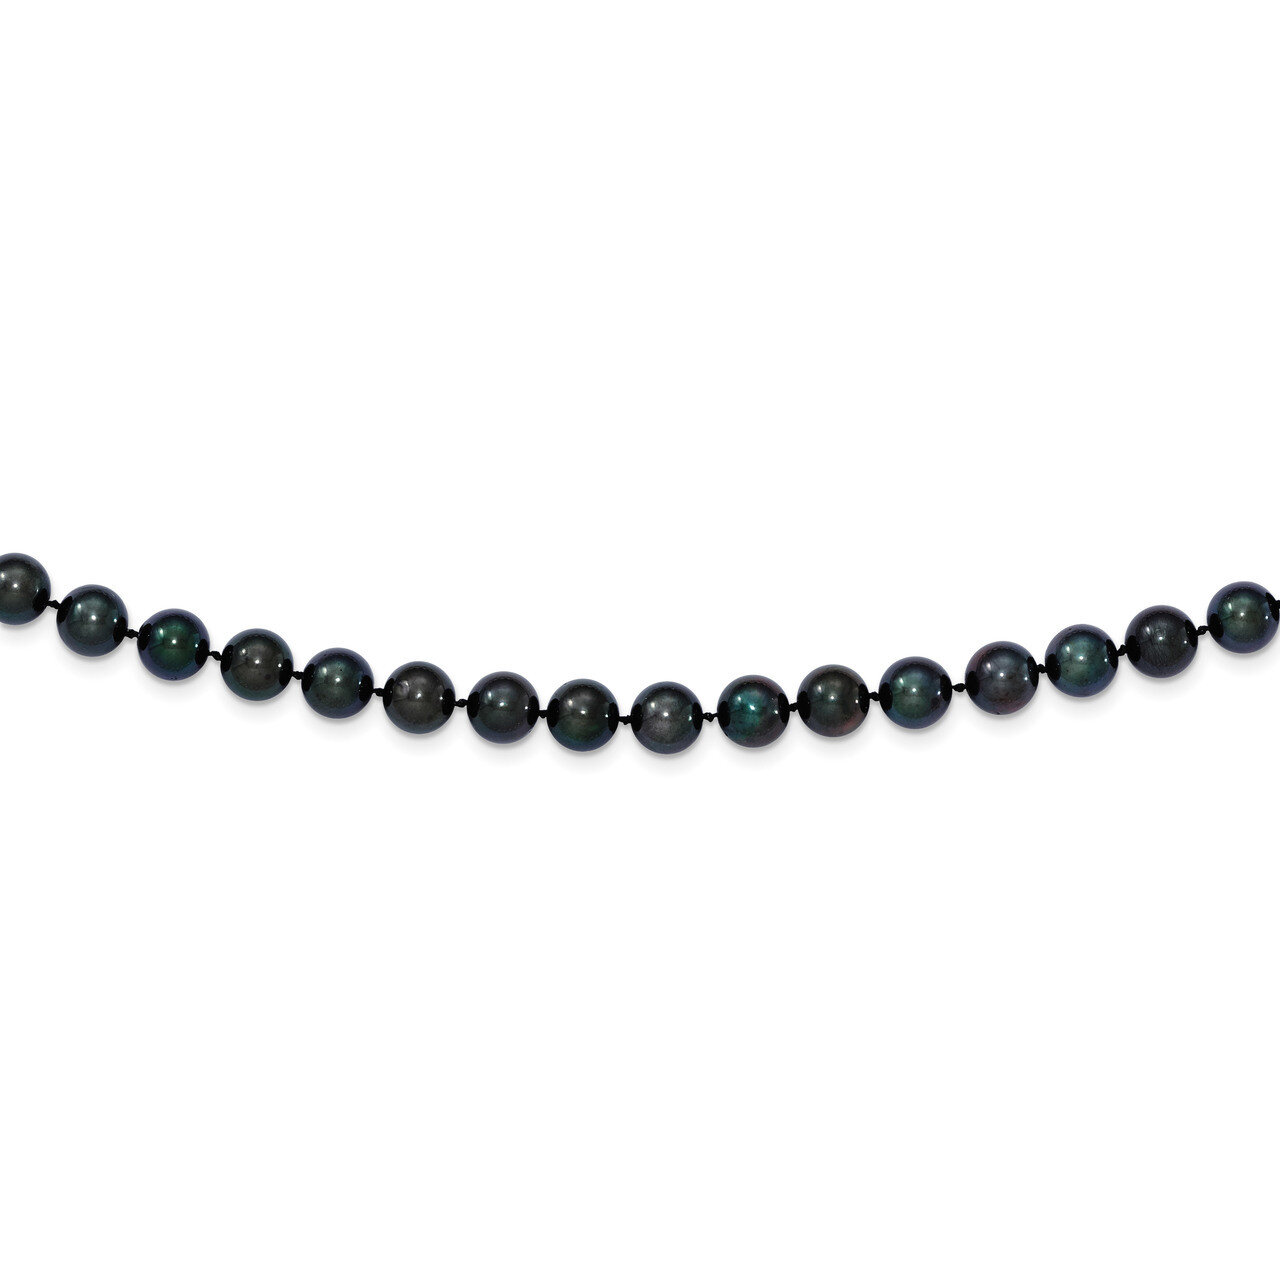 20 Inch 7-8mm Round Black Saltwater Akoya Cultured Pearl Necklace 14k white Gold PLB70-20